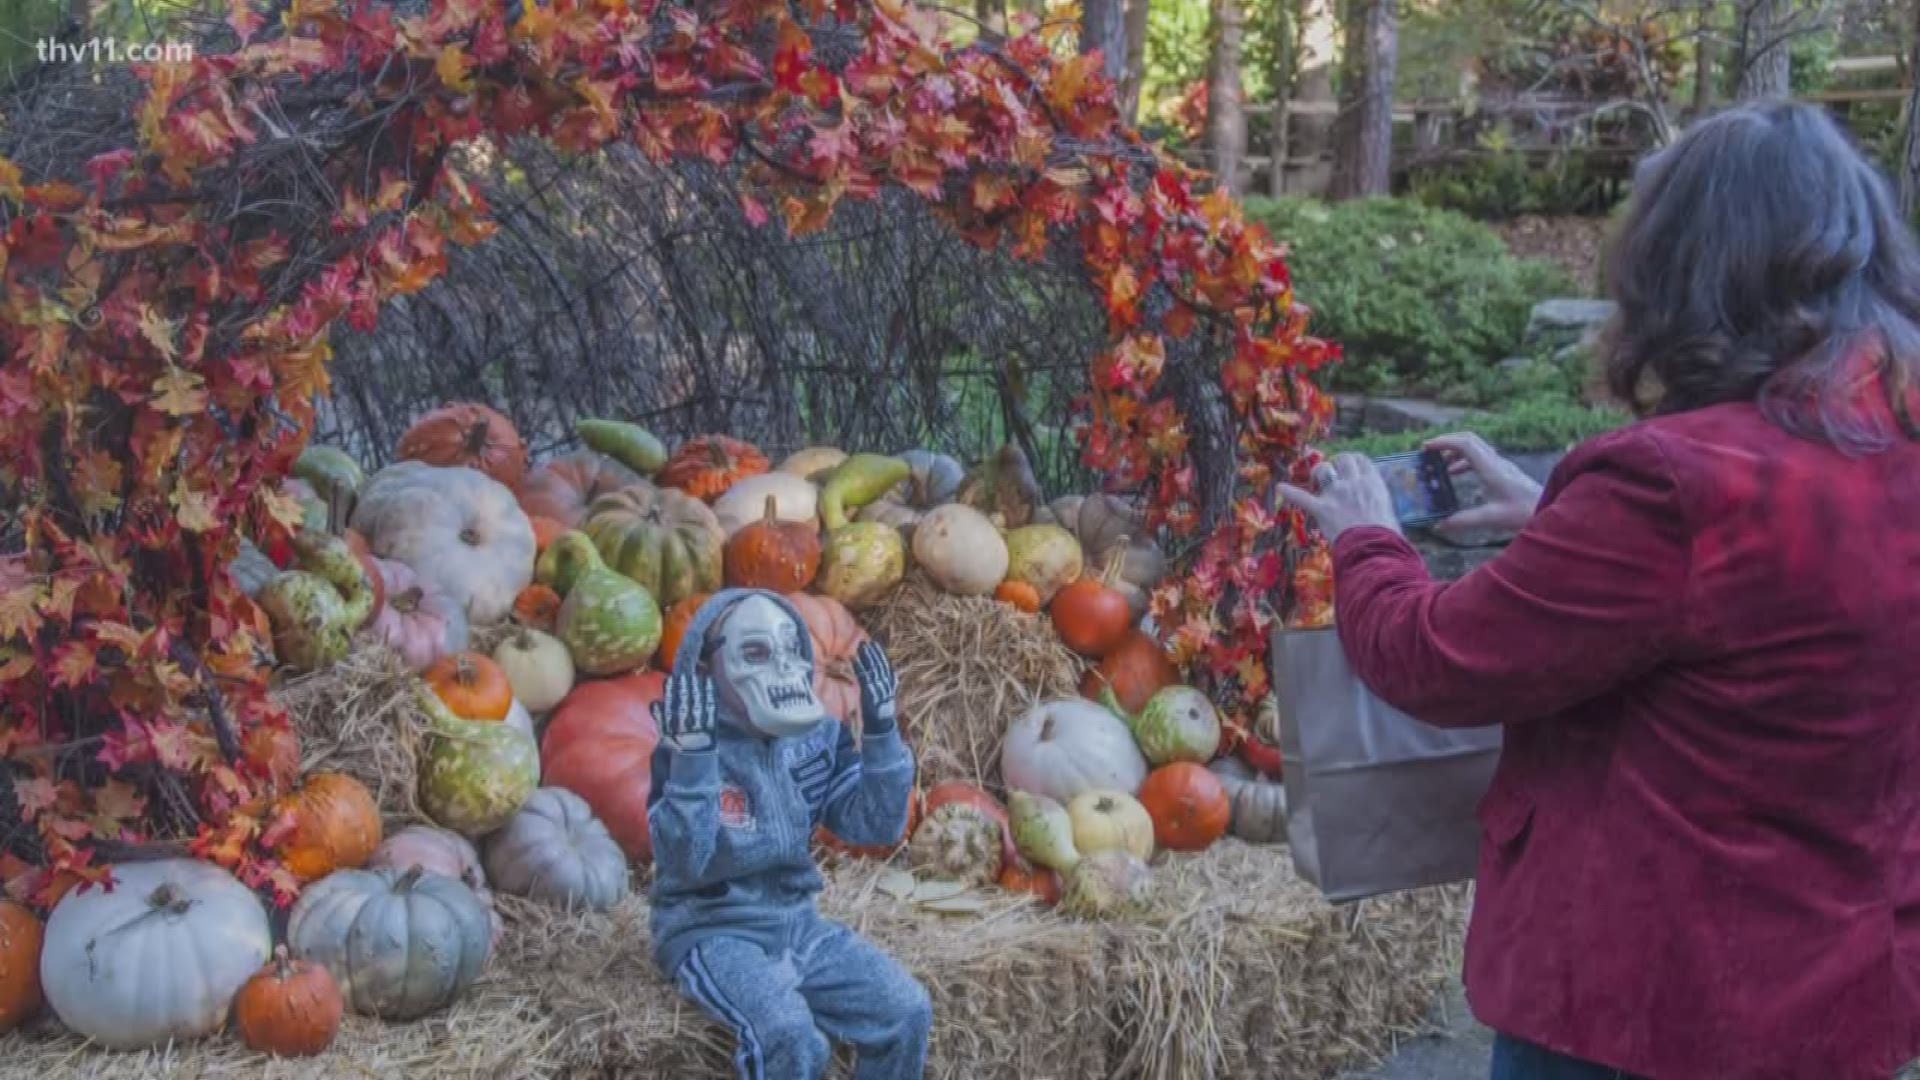 Garvan Woodland Gardens is hosting its 'Celebrate Fall Day' on Saturday, October 12th.